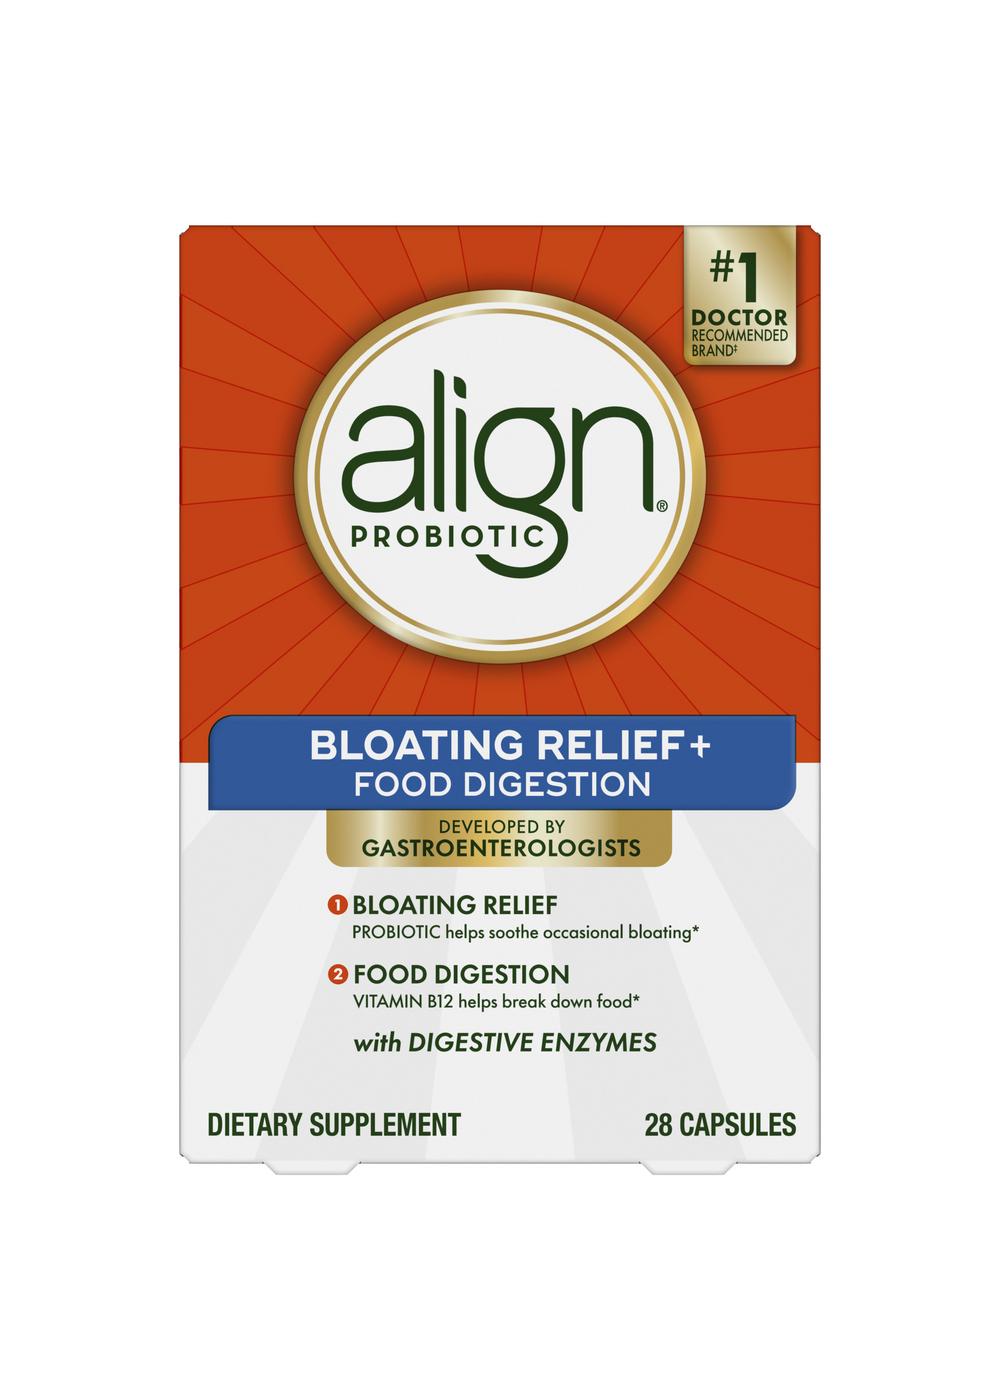 Align Probiotic Bloating & Digestion Relief Capsules; image 1 of 2